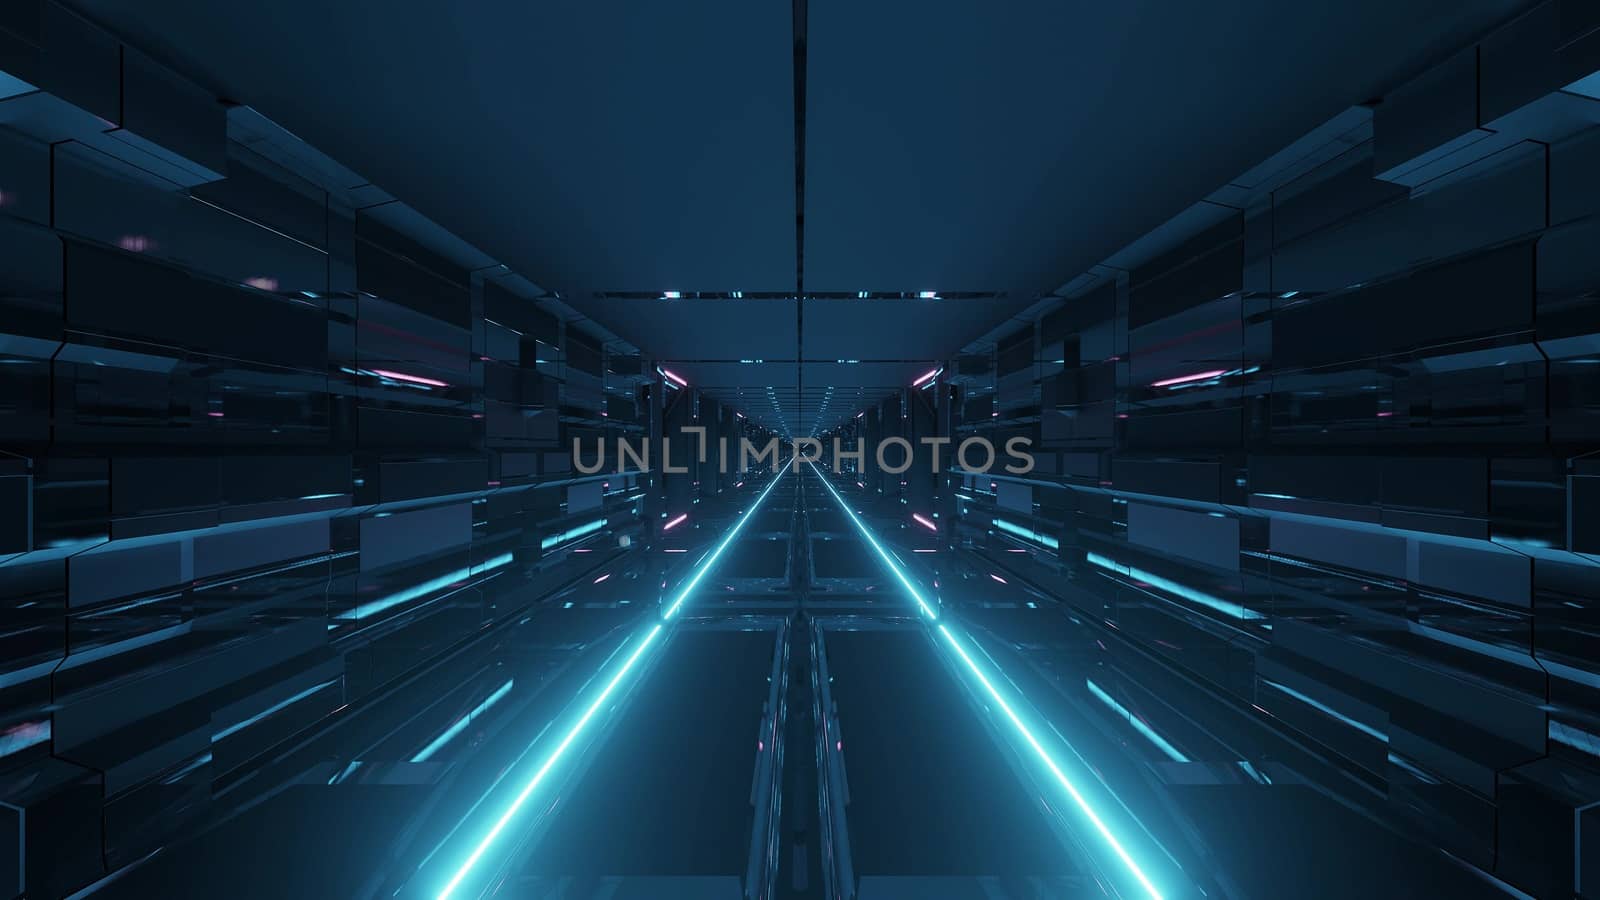 futuristic technical science-fiction tunnel corridor with endless glowing lights 3d illustration background wallpaper graphic artwork, scifi hangar with reflective glass windows 3d rendering design